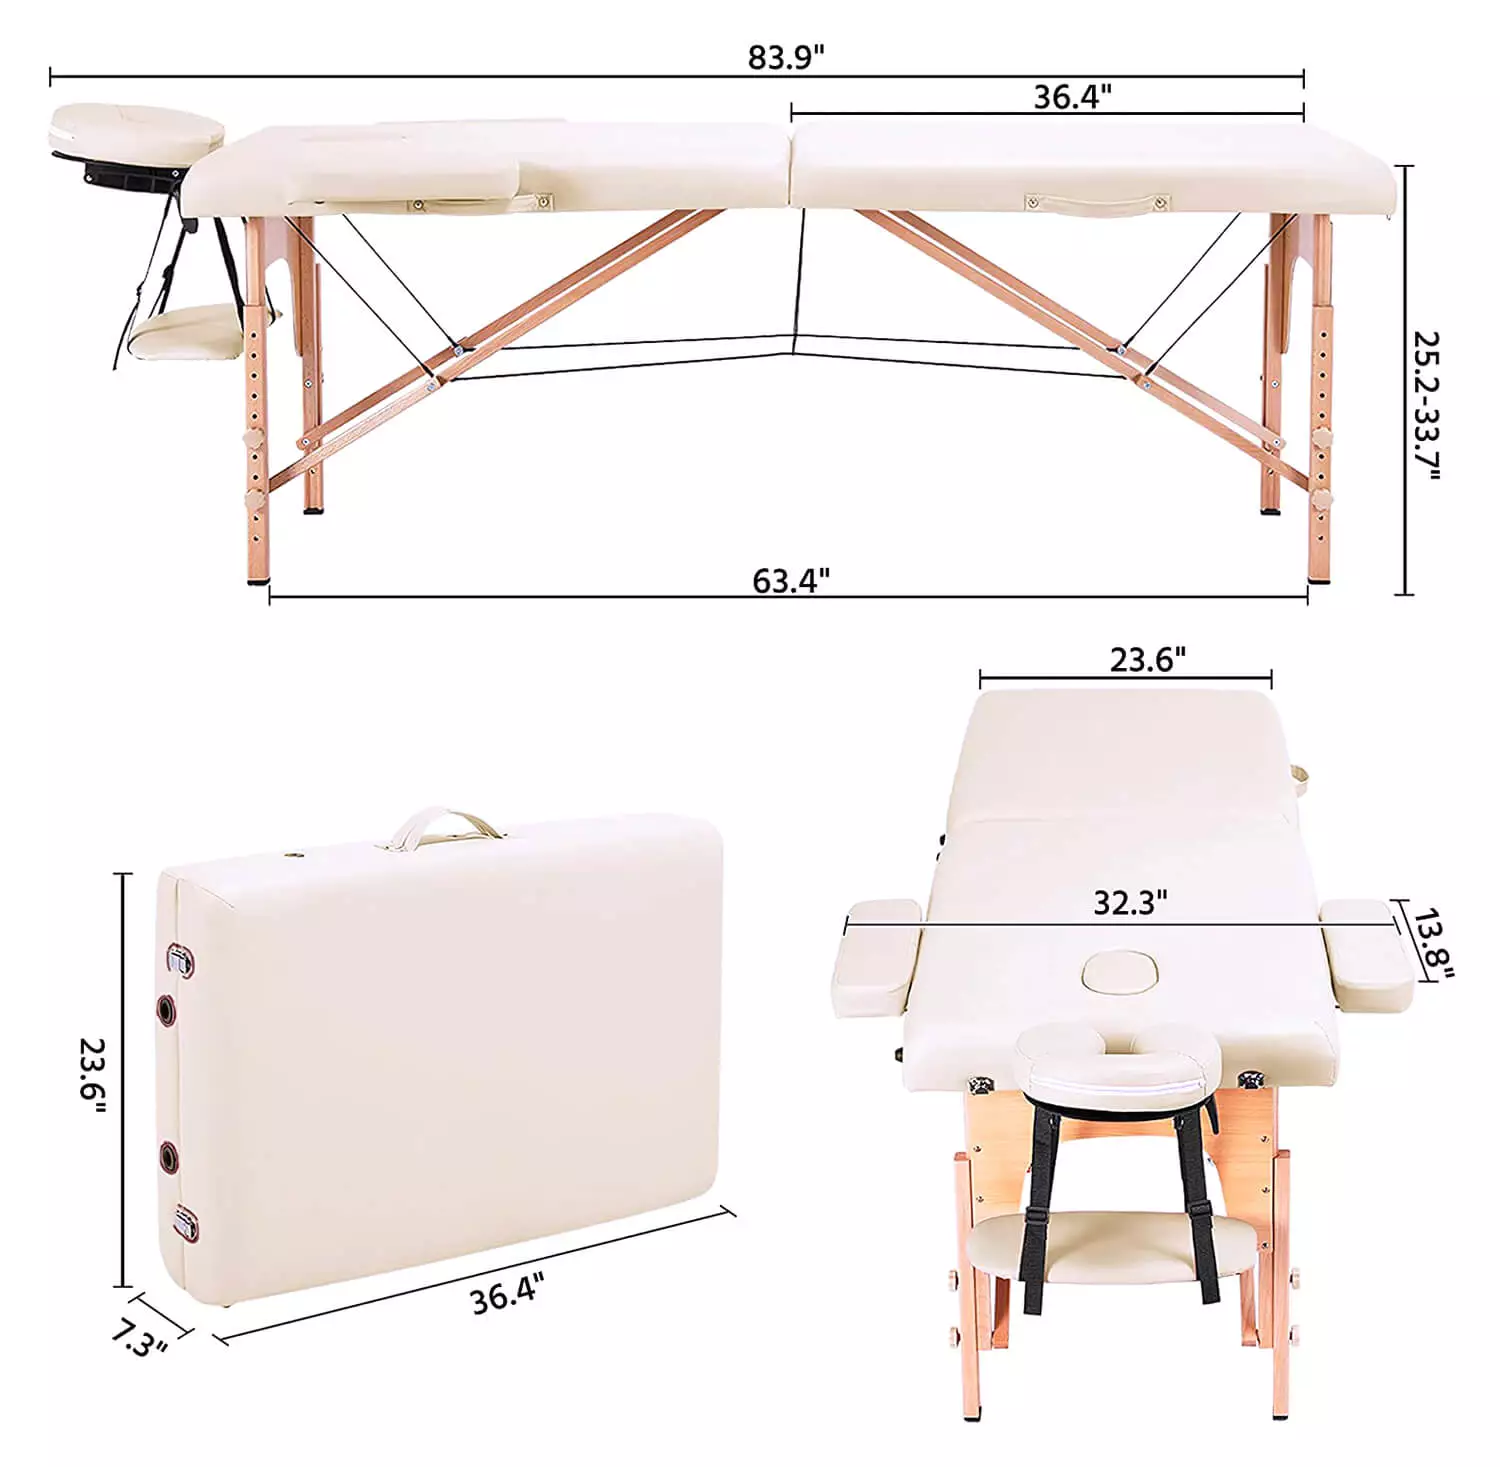 Folding-Beauty-Massage-Bed-_-Portable-Spa-Tables-_-IOLITE-10.